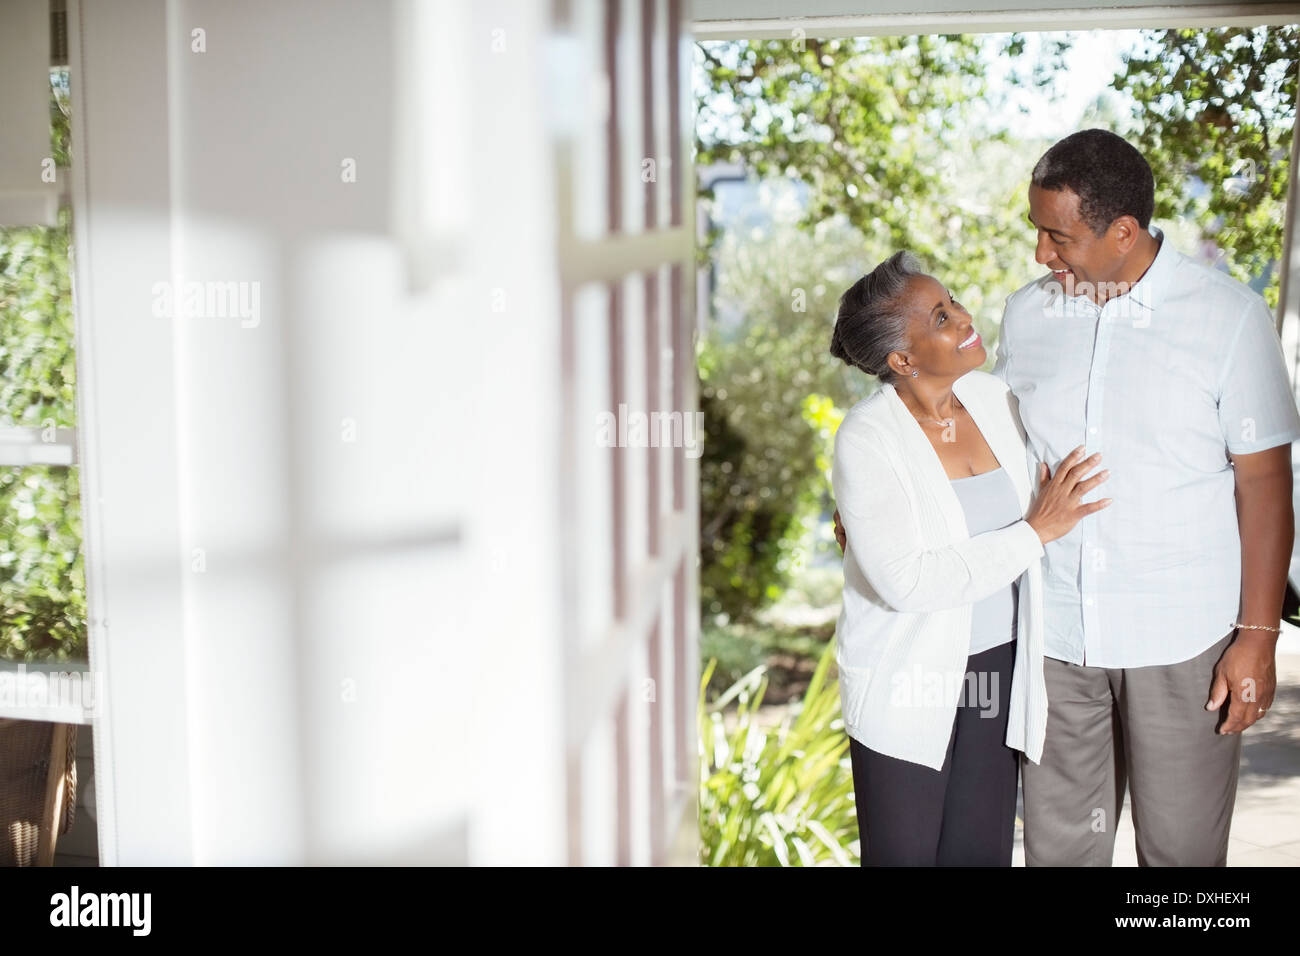 Senior couple hugging on patio Banque D'Images